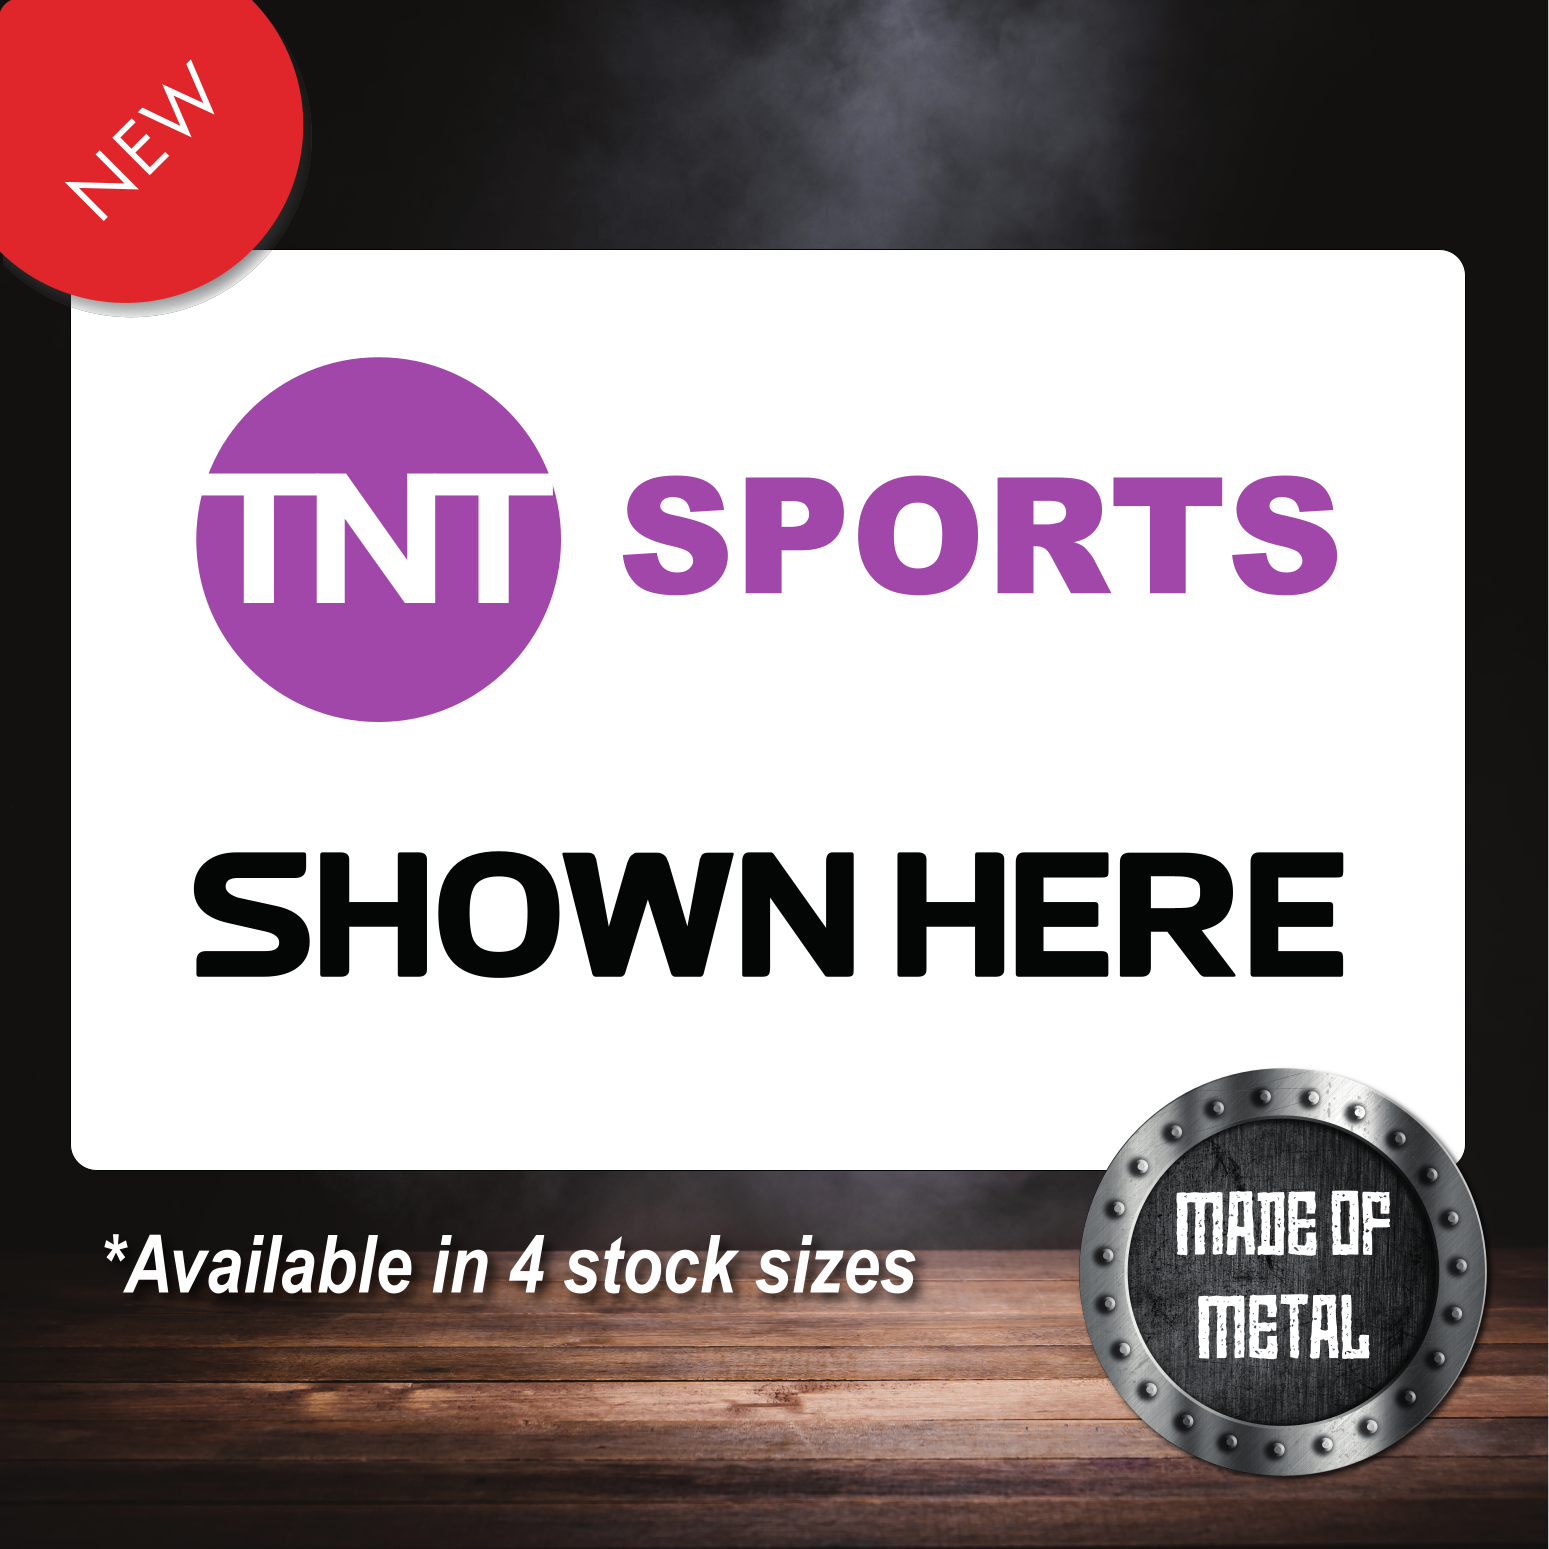 TNT sports shown here home bar metal Sign. Can be personalised